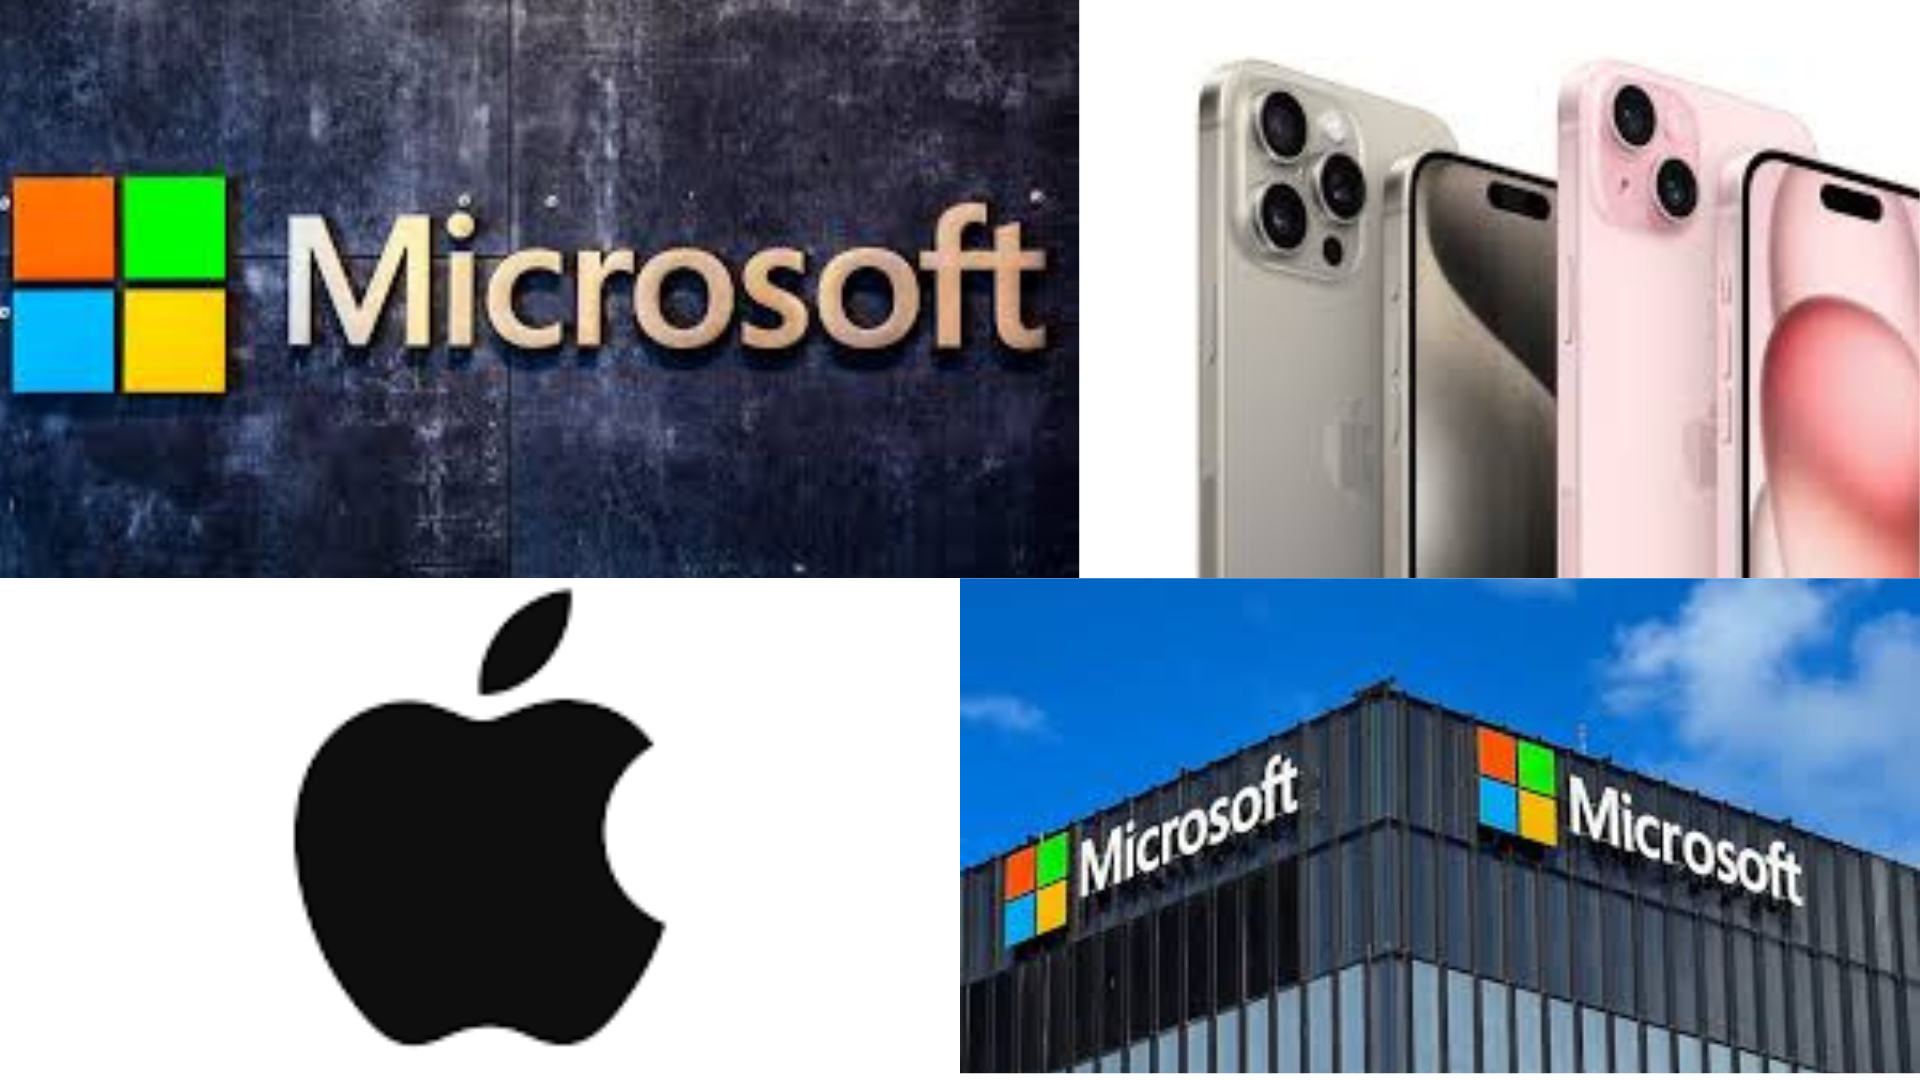 Apple Or Microsoft: Which Company Is Now The World's Most Valuable?